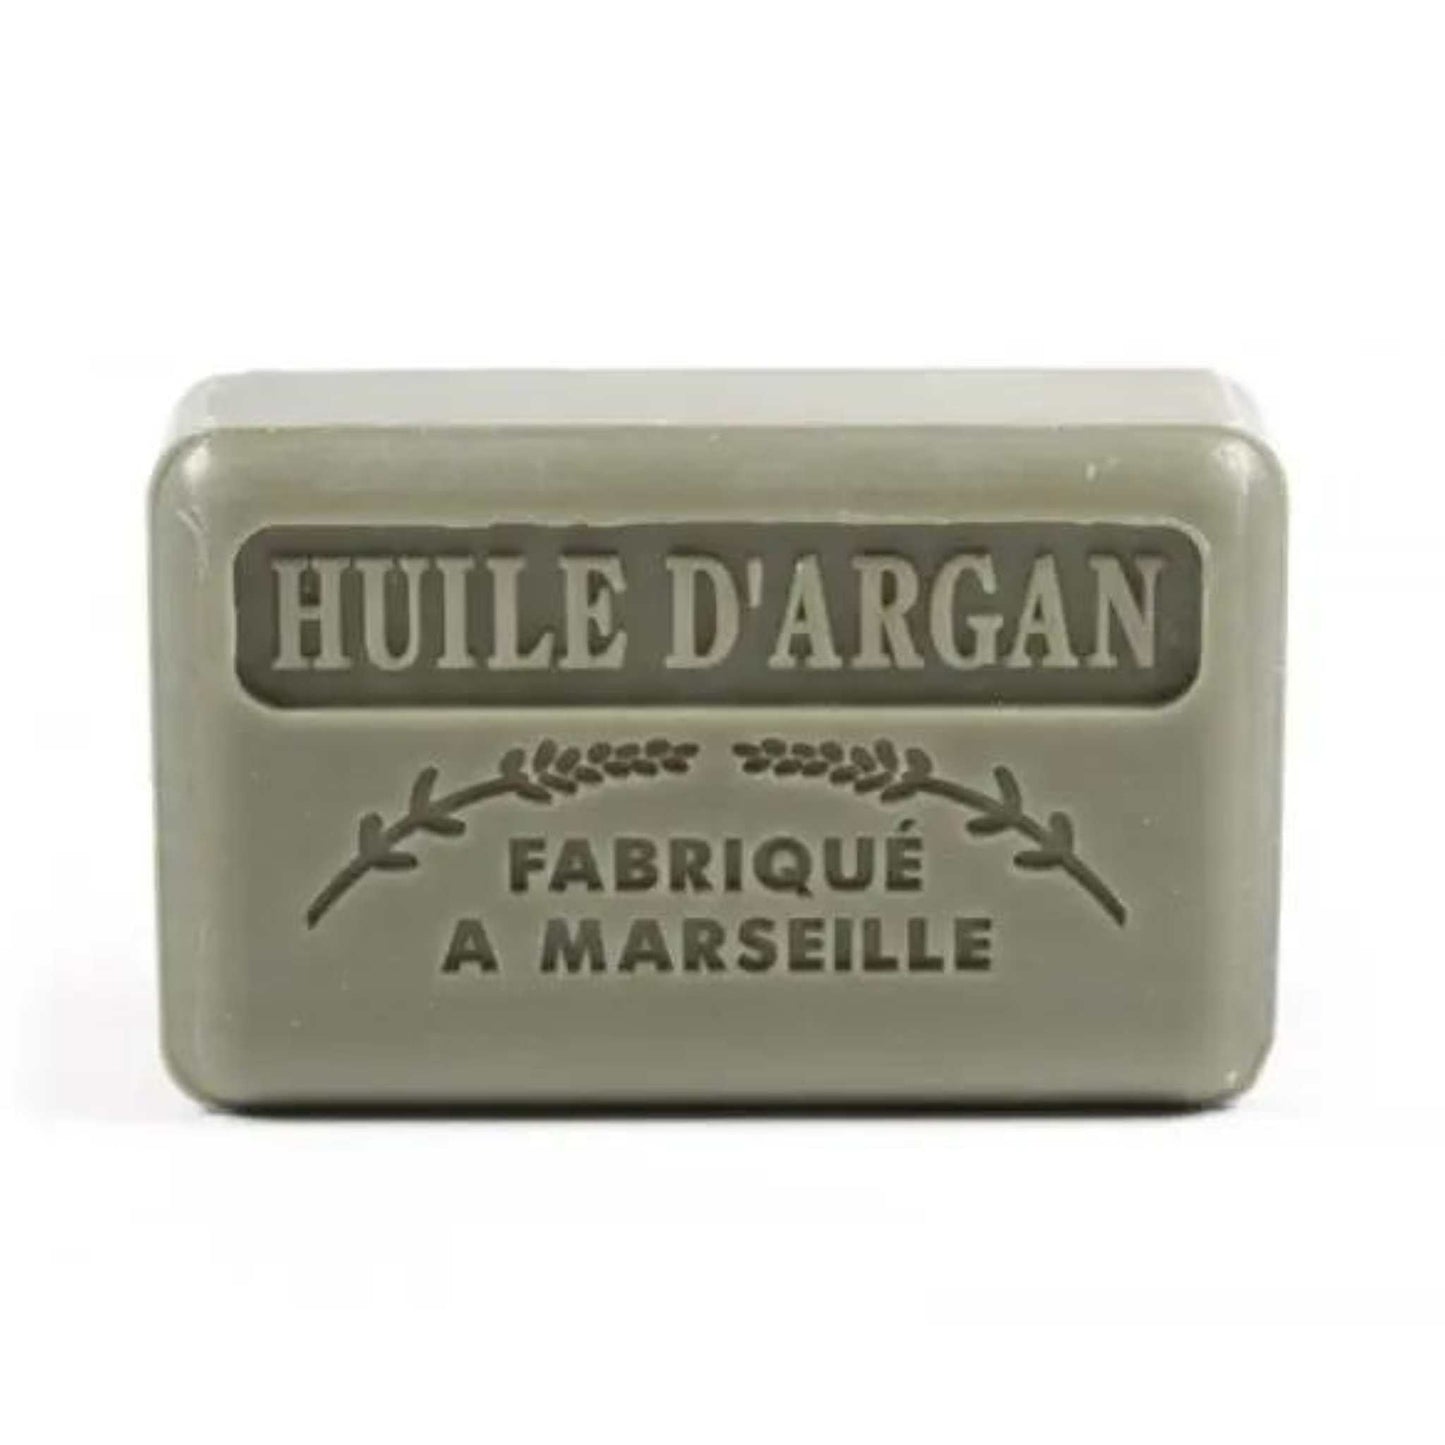 Load image into Gallery viewer, Savon de Marseille Soap Marseille Soap Bar with Organic Shea Butter - 125g - Argan Oil
